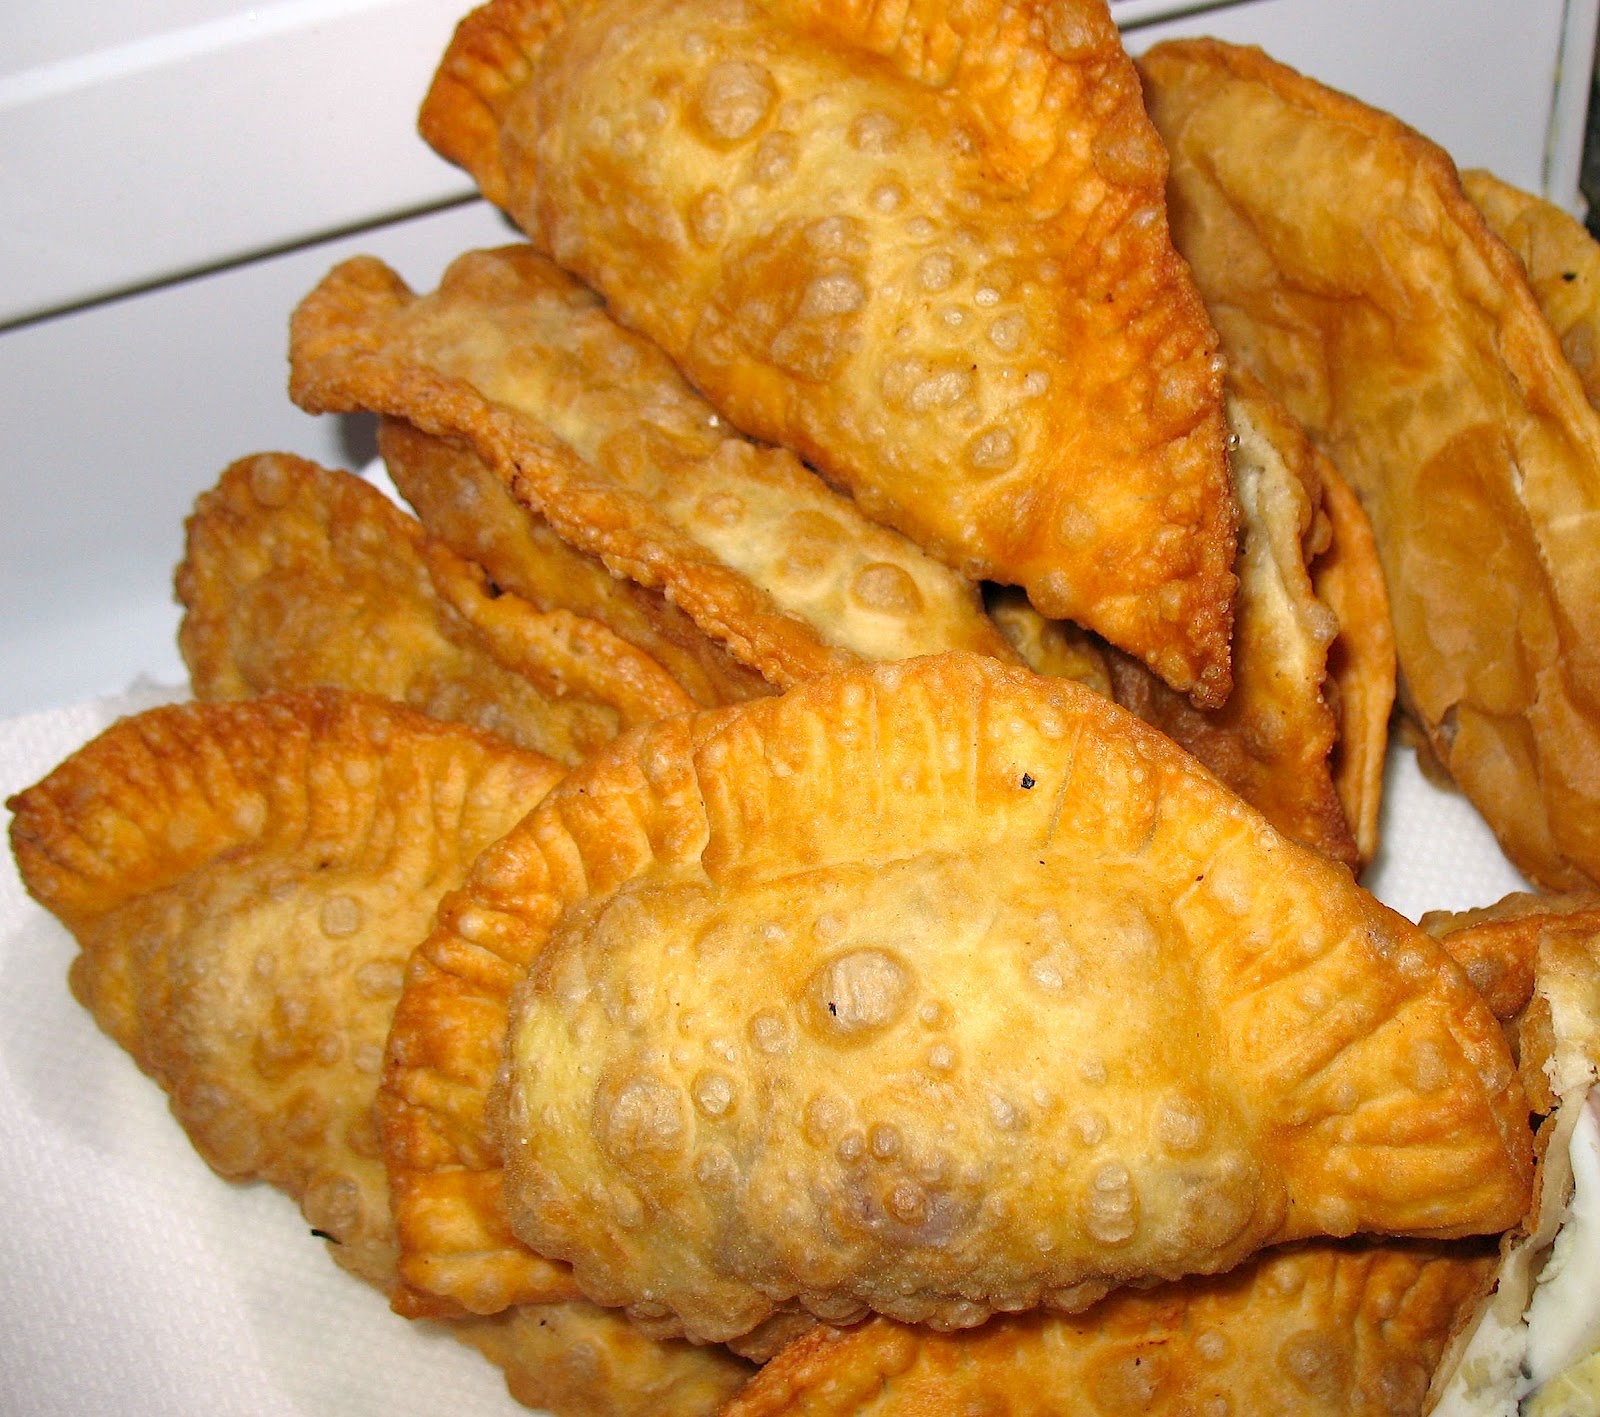 GF Empanada made with xanthan gum, by Lauren V. Allen for The World in